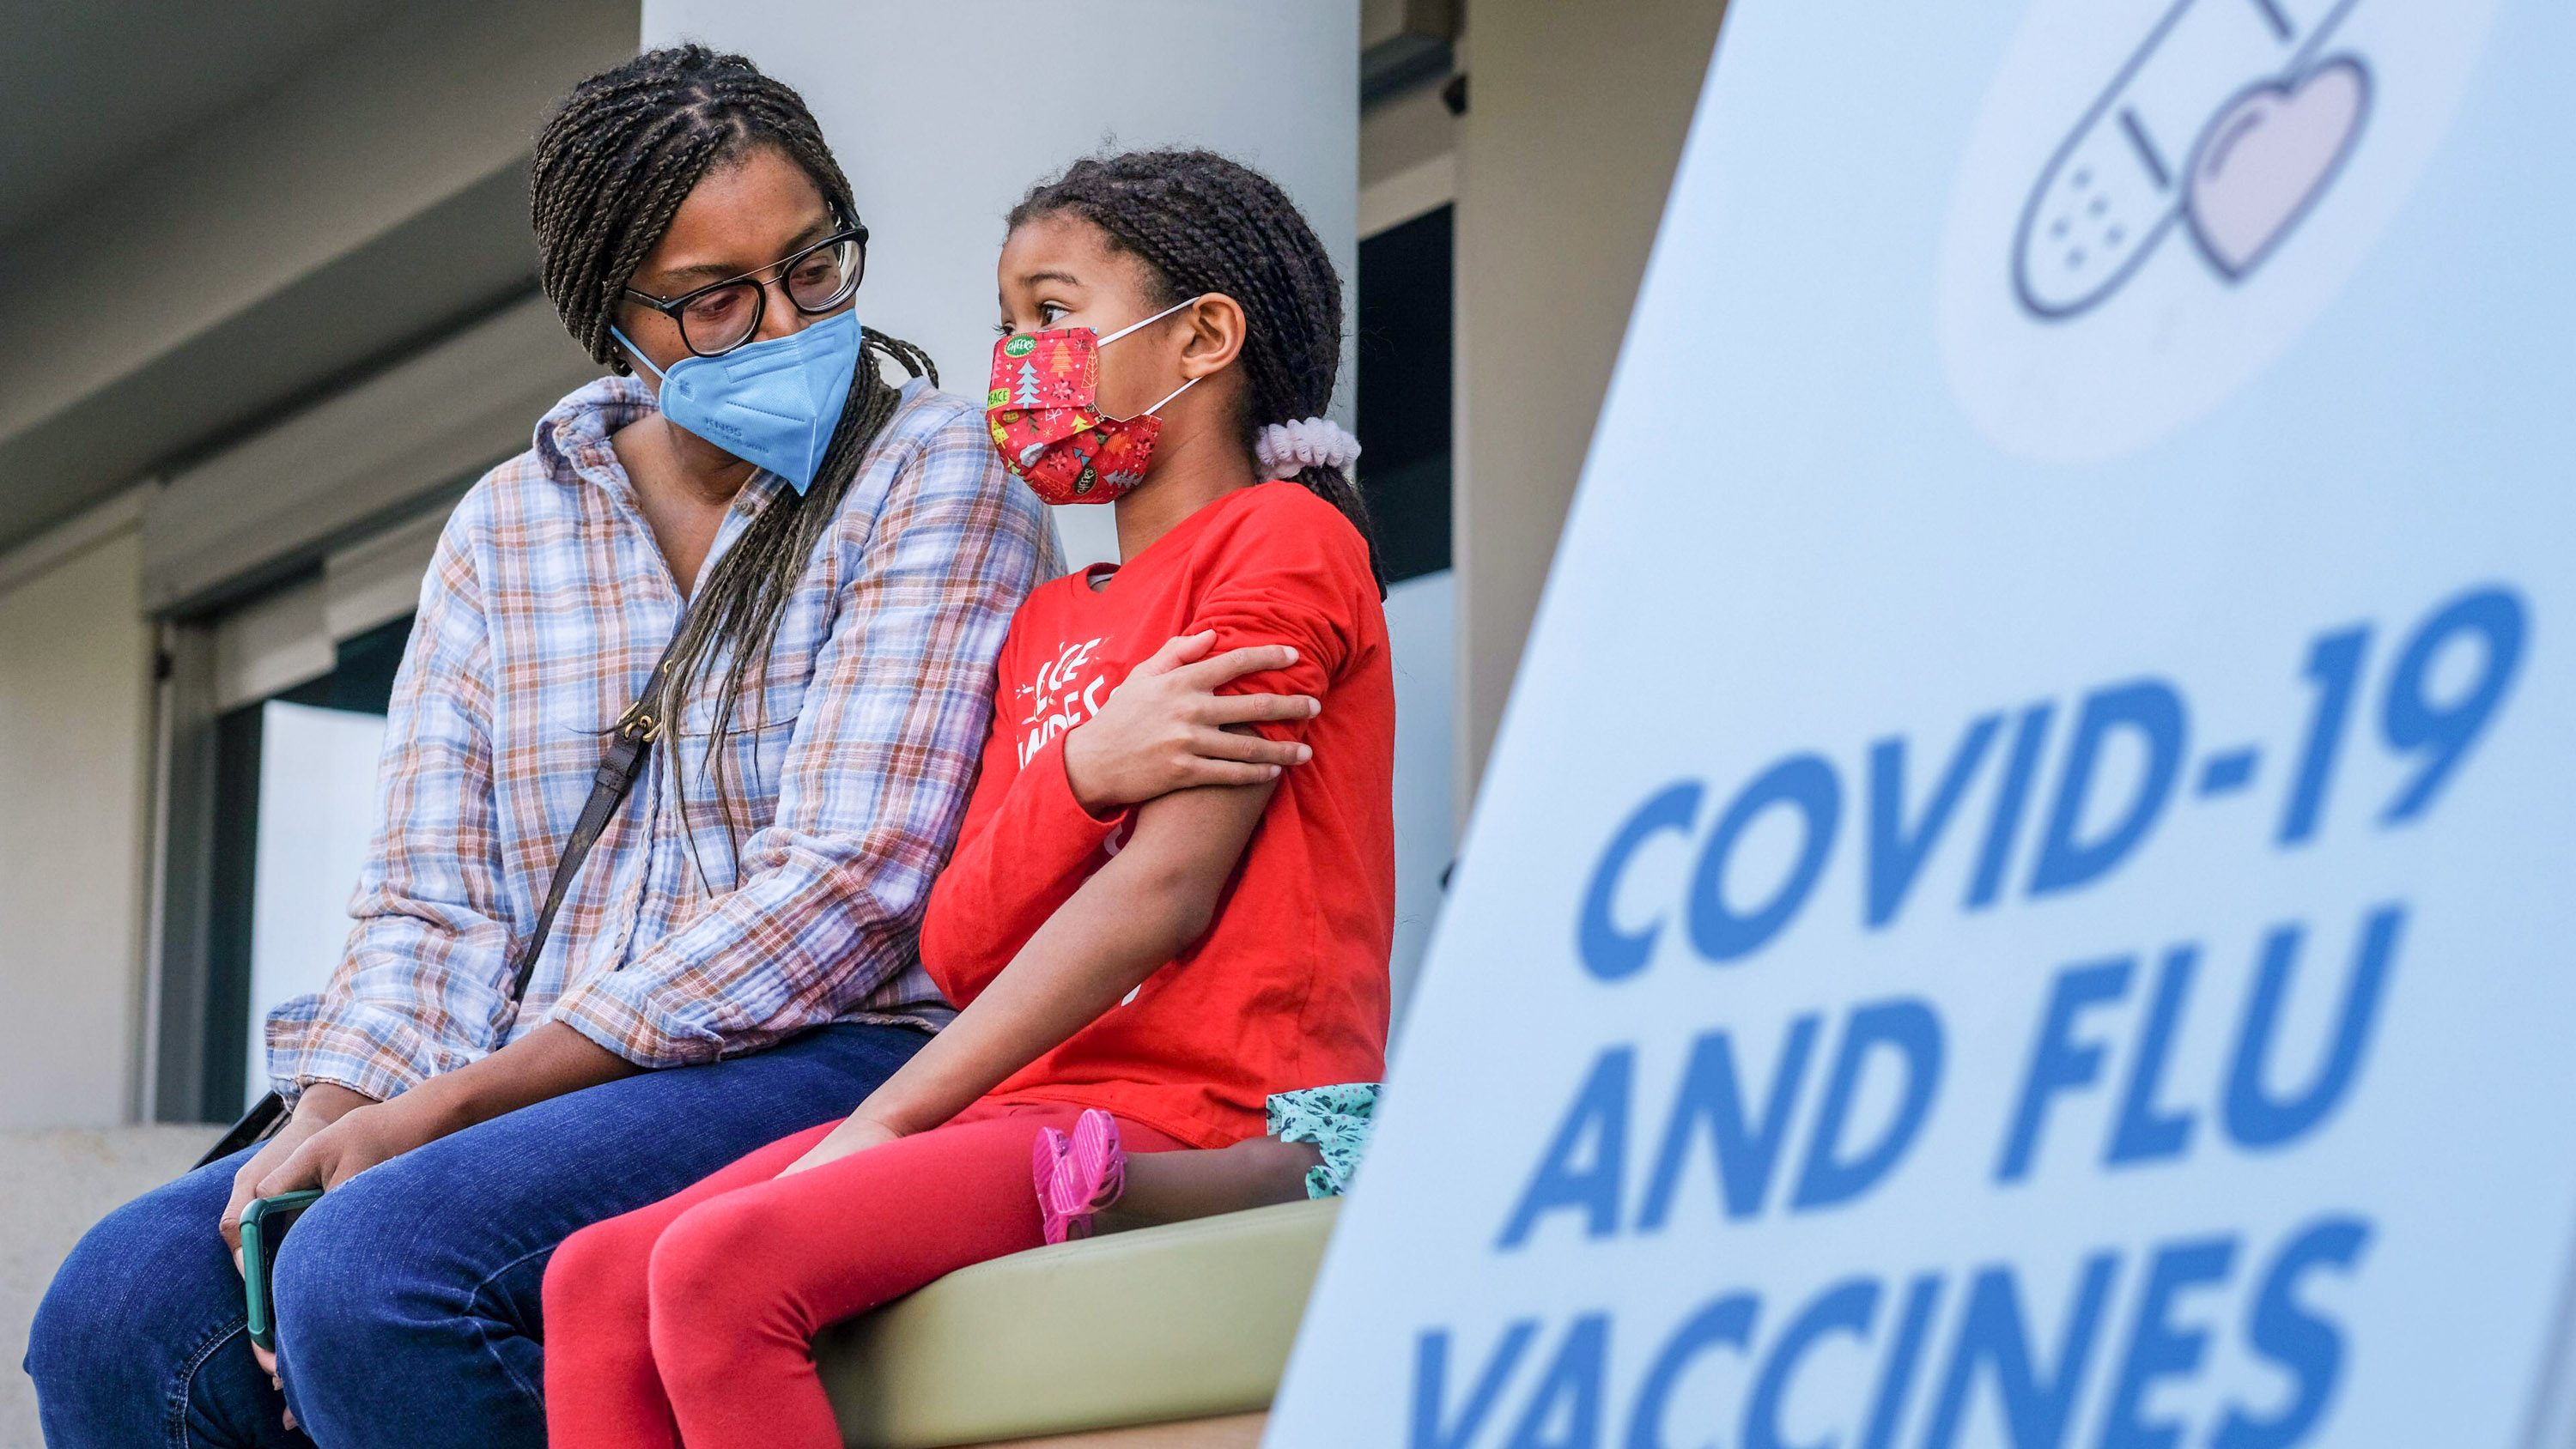 Amelle Samuel, 7, and her mother Kimberli seat in the waiting area after getting a COVID-19 vaccination shot. A sign for COVID-19 and flu vaccines is out of focus in the foreground.